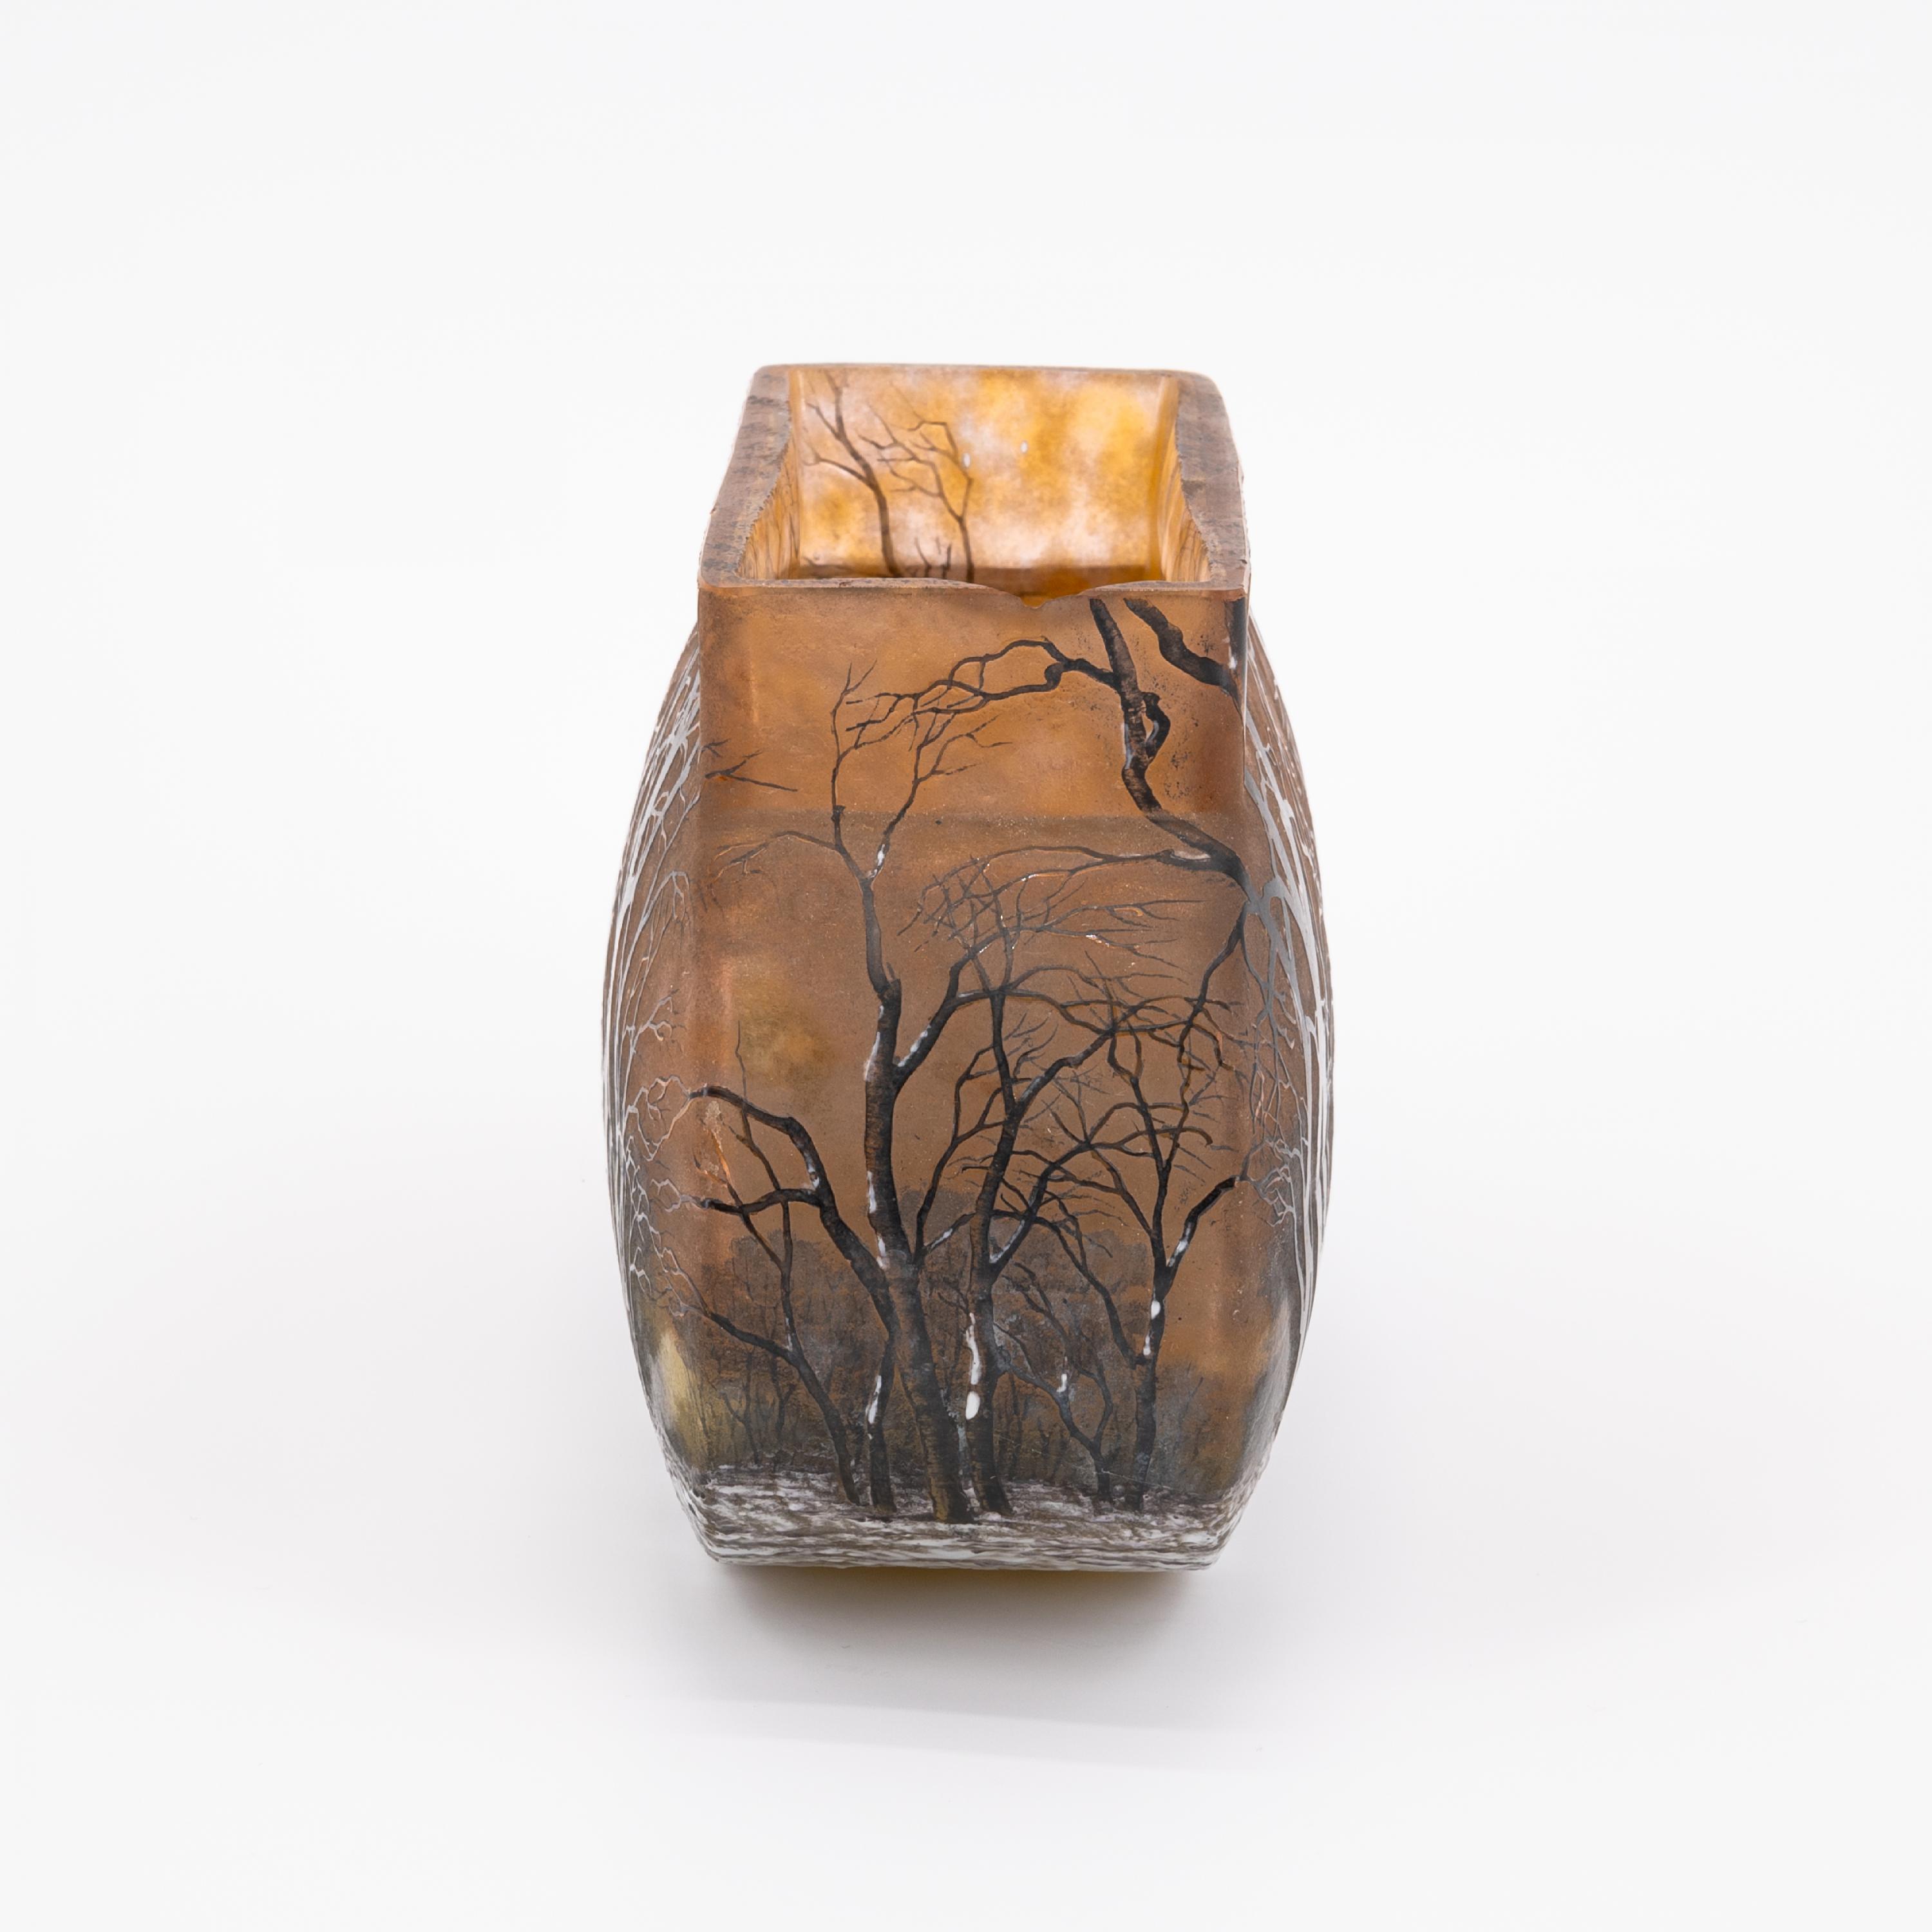 OVAL GLASS VASE WITH WINTER LANDSCAPE - Image 2 of 6